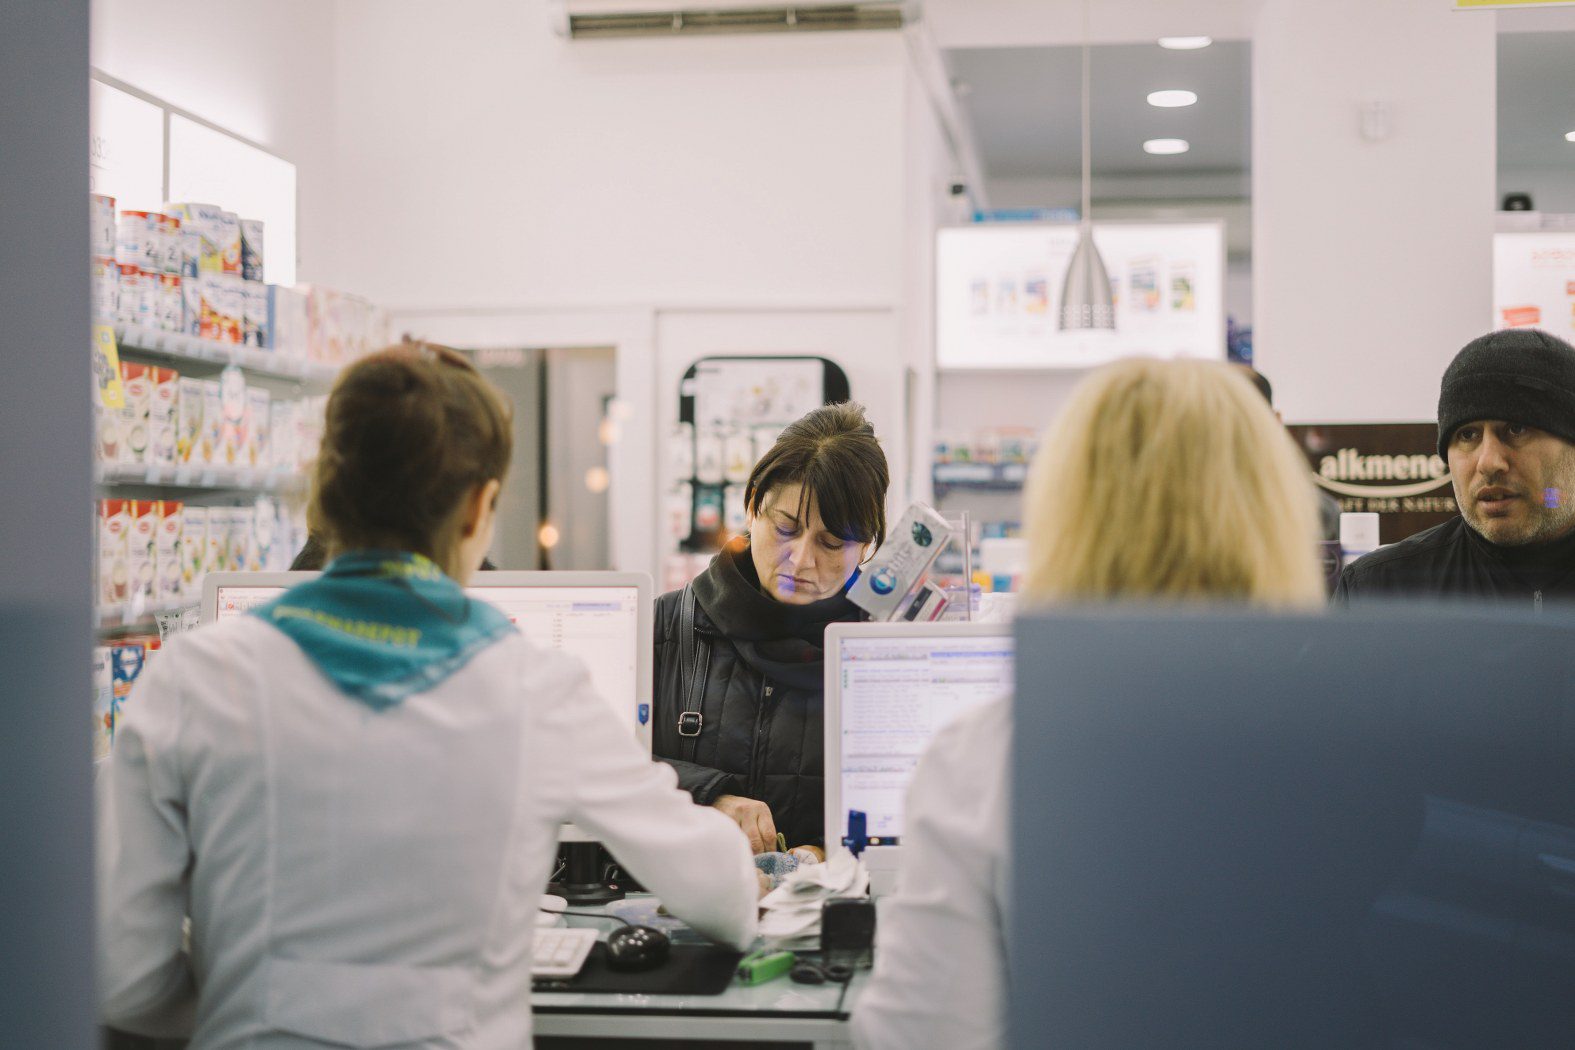 image of a busy pharmacy, demonstrating the need for a quality pharmacy answering service